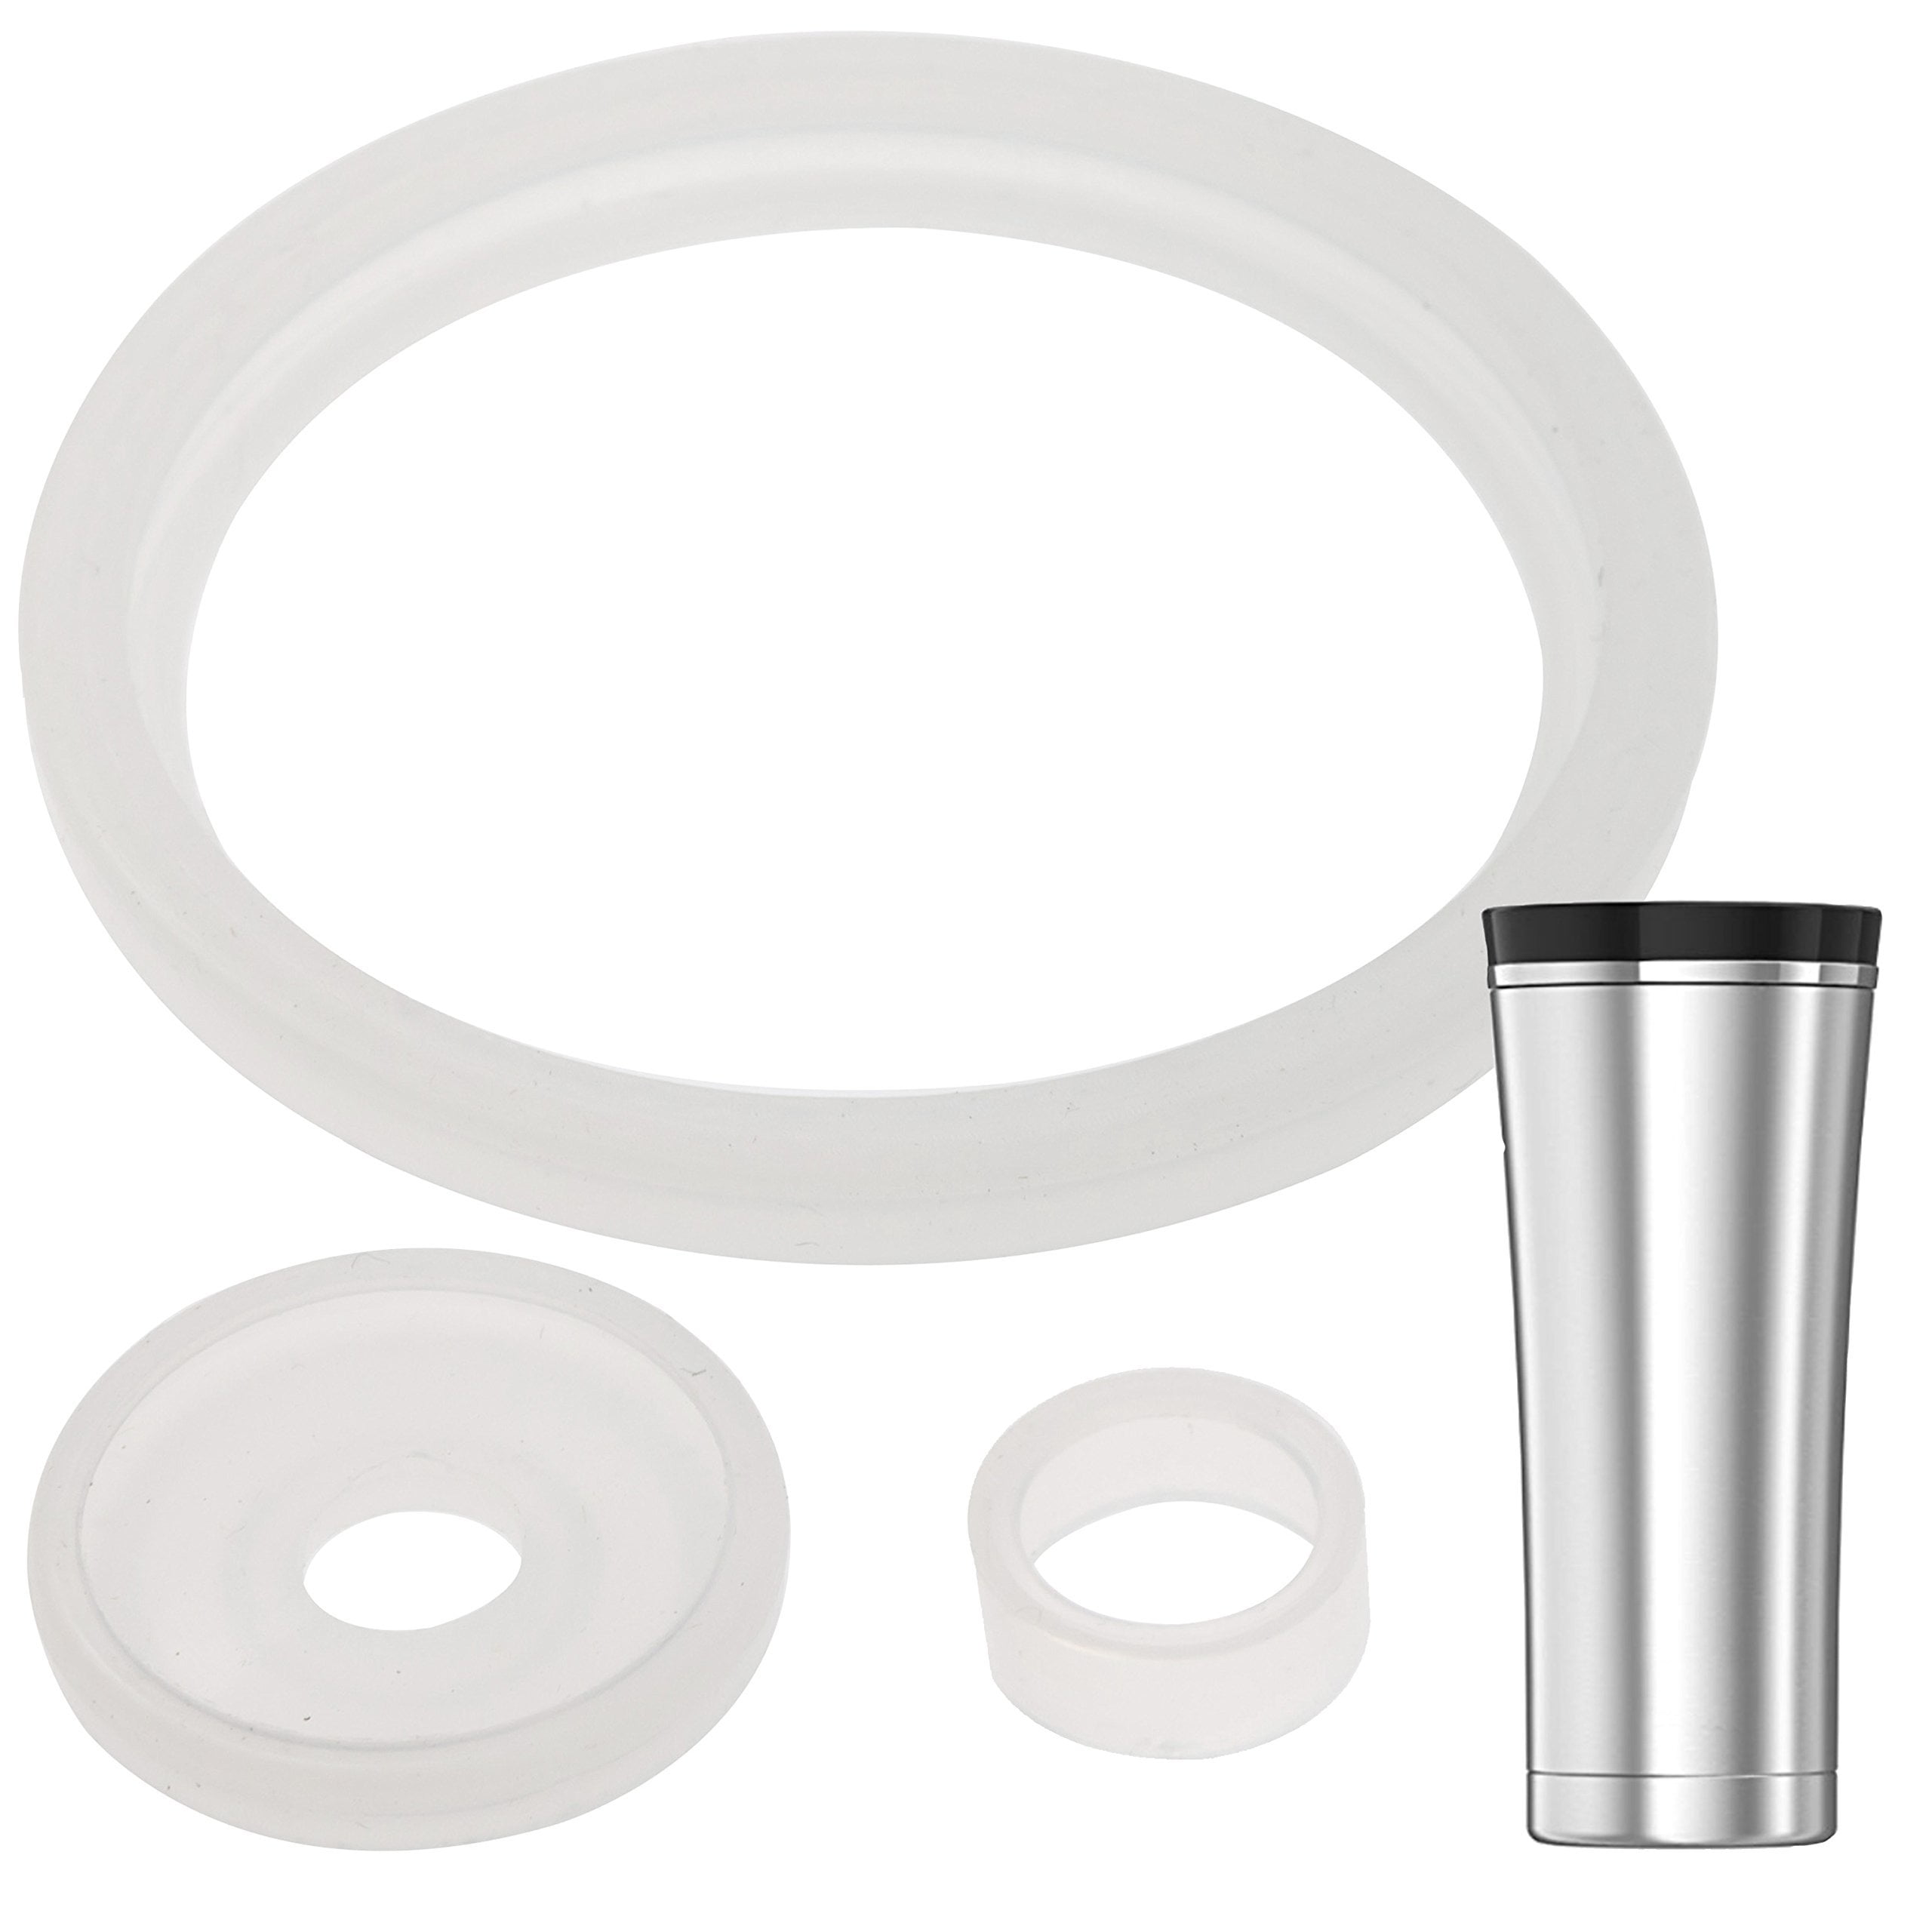 IMPRESA [3 Sets] Water Bottle Gasket Replacement for Thermoflask